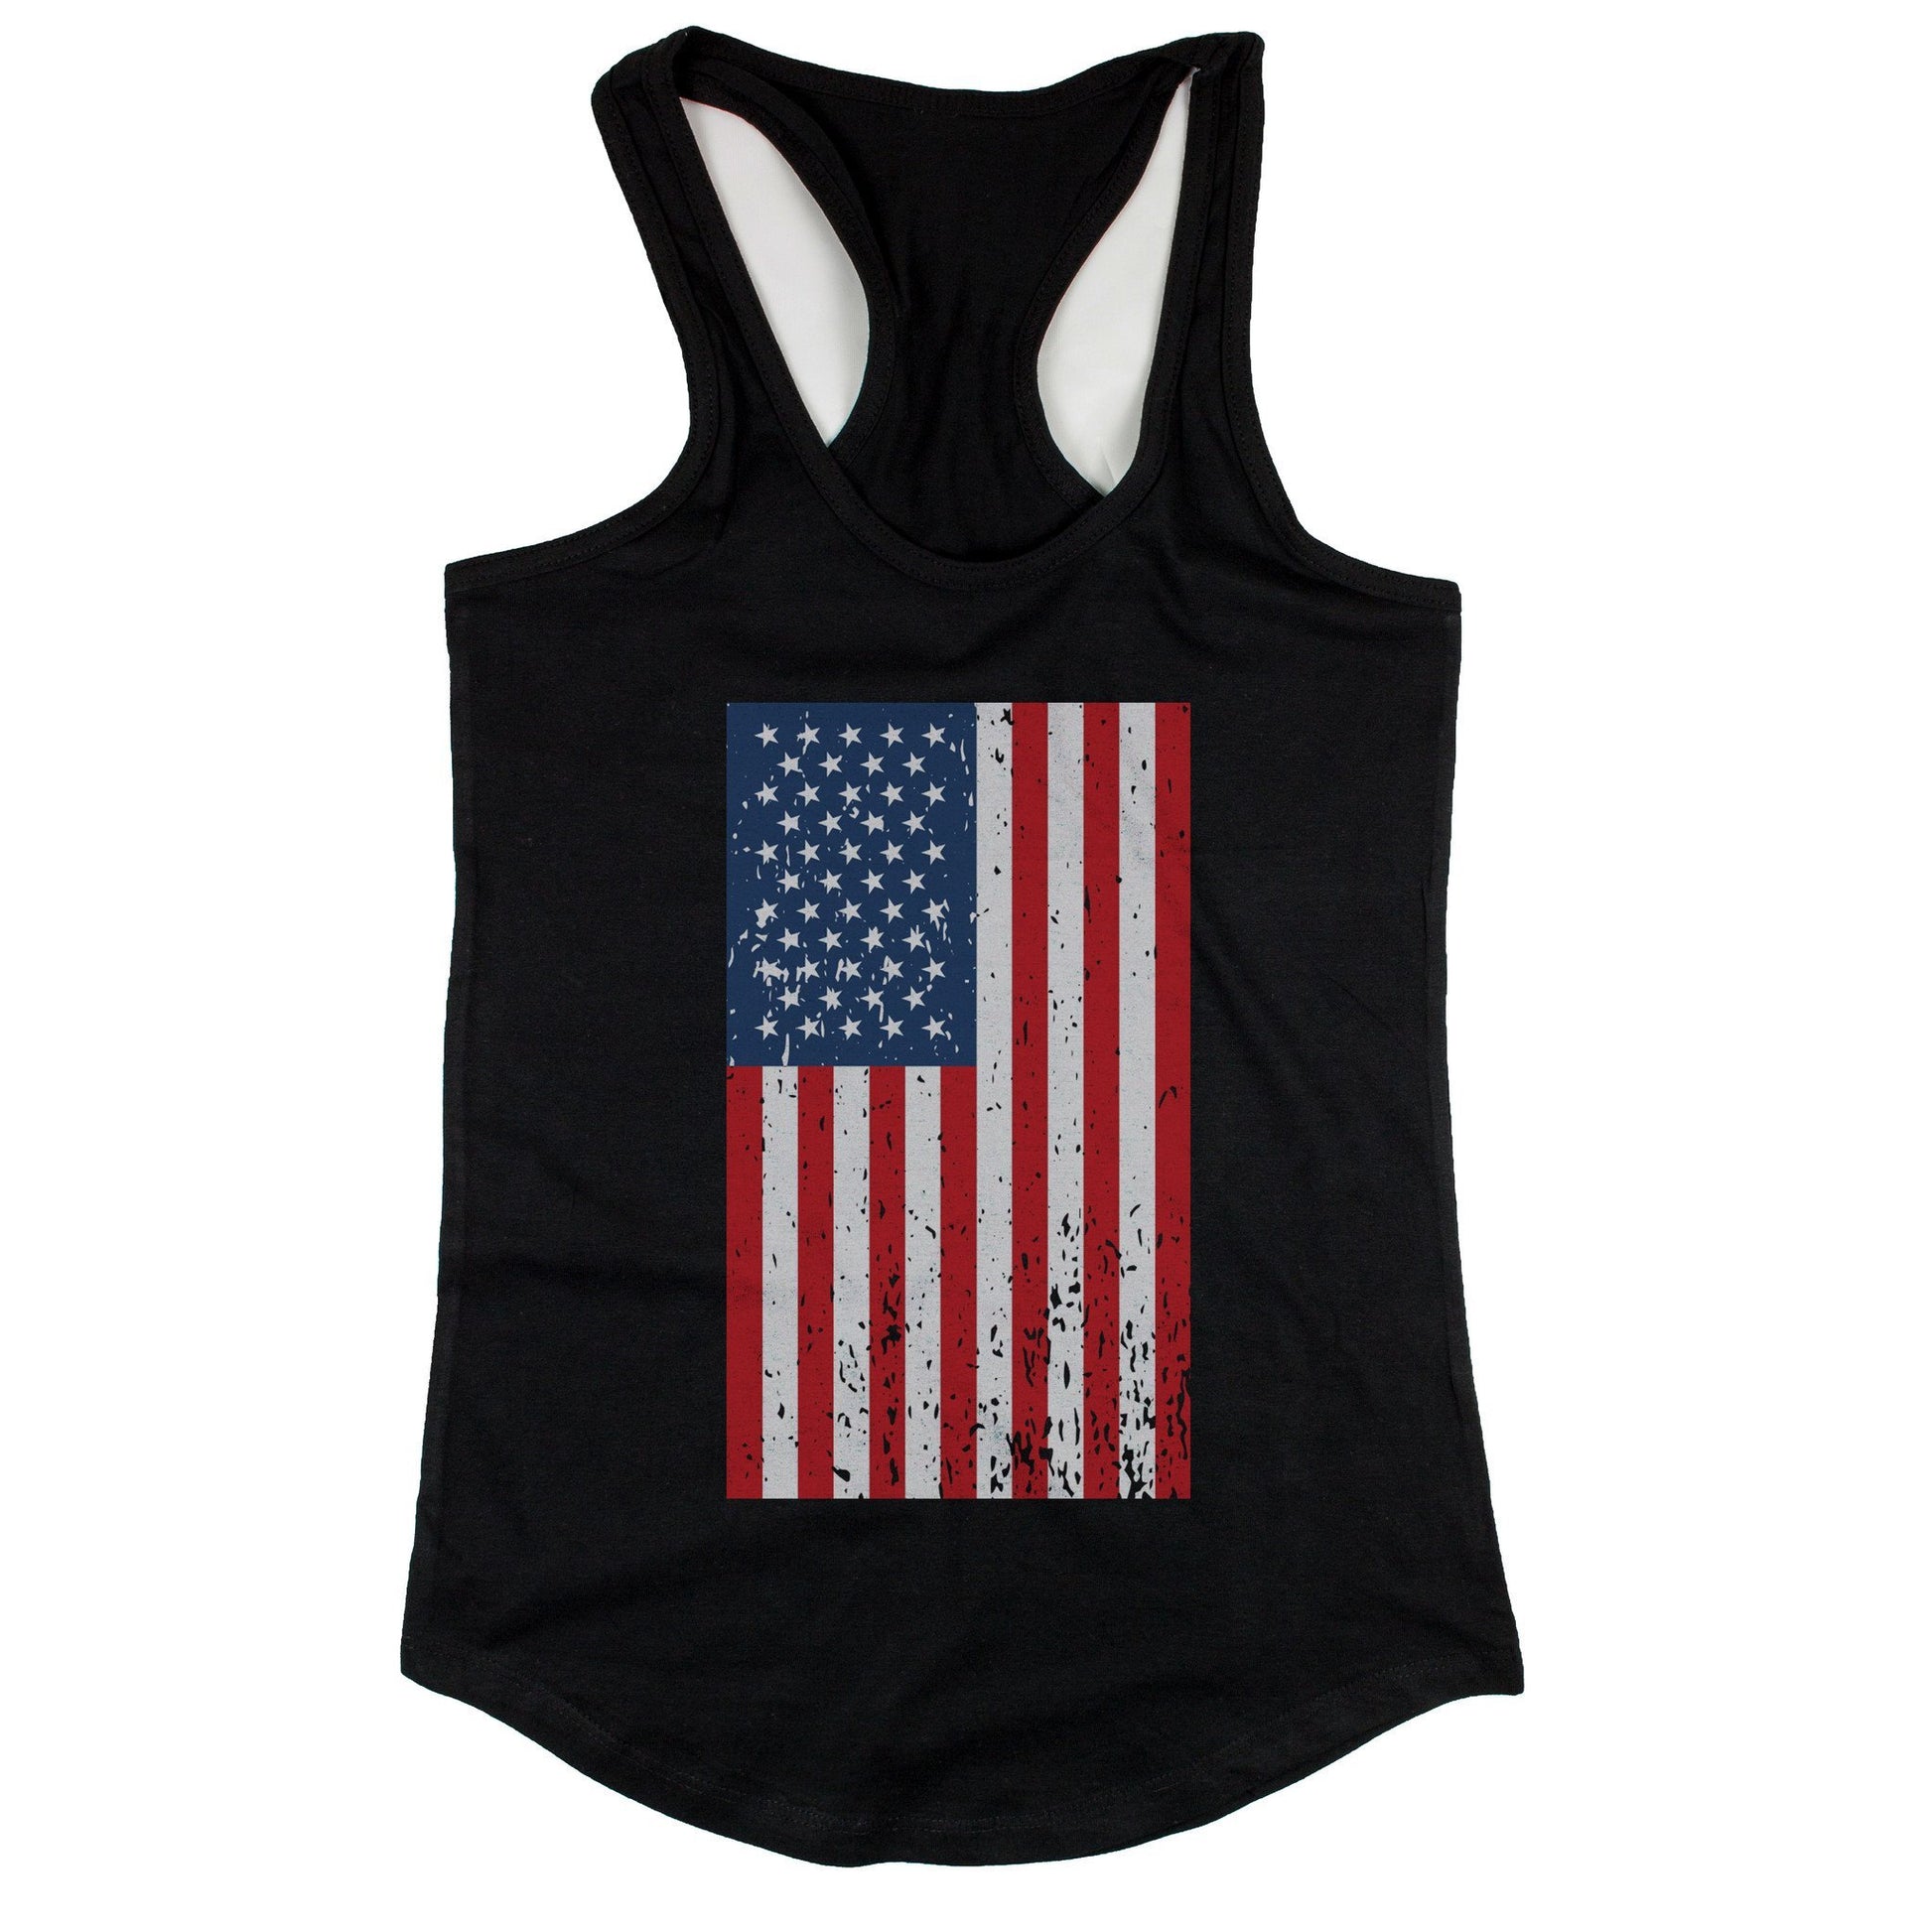 Distressed American Flag Black Women's Tank Tops for Independence Day-Gains Everyday